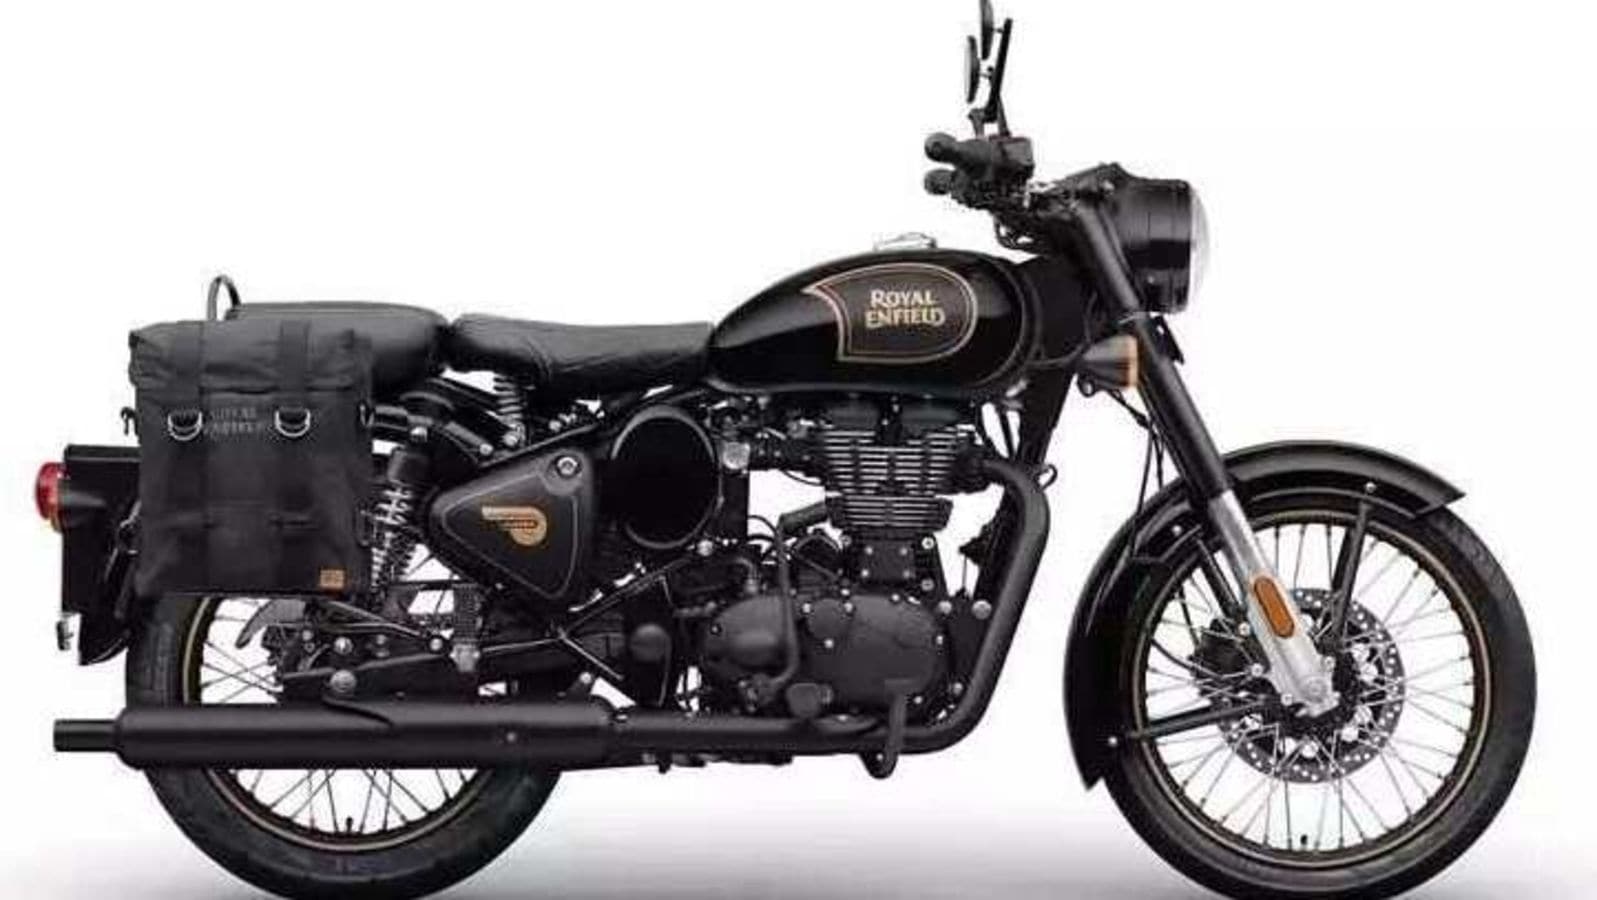 Royal Enfield launches Classic 500 Tribute Black Edition in the UK